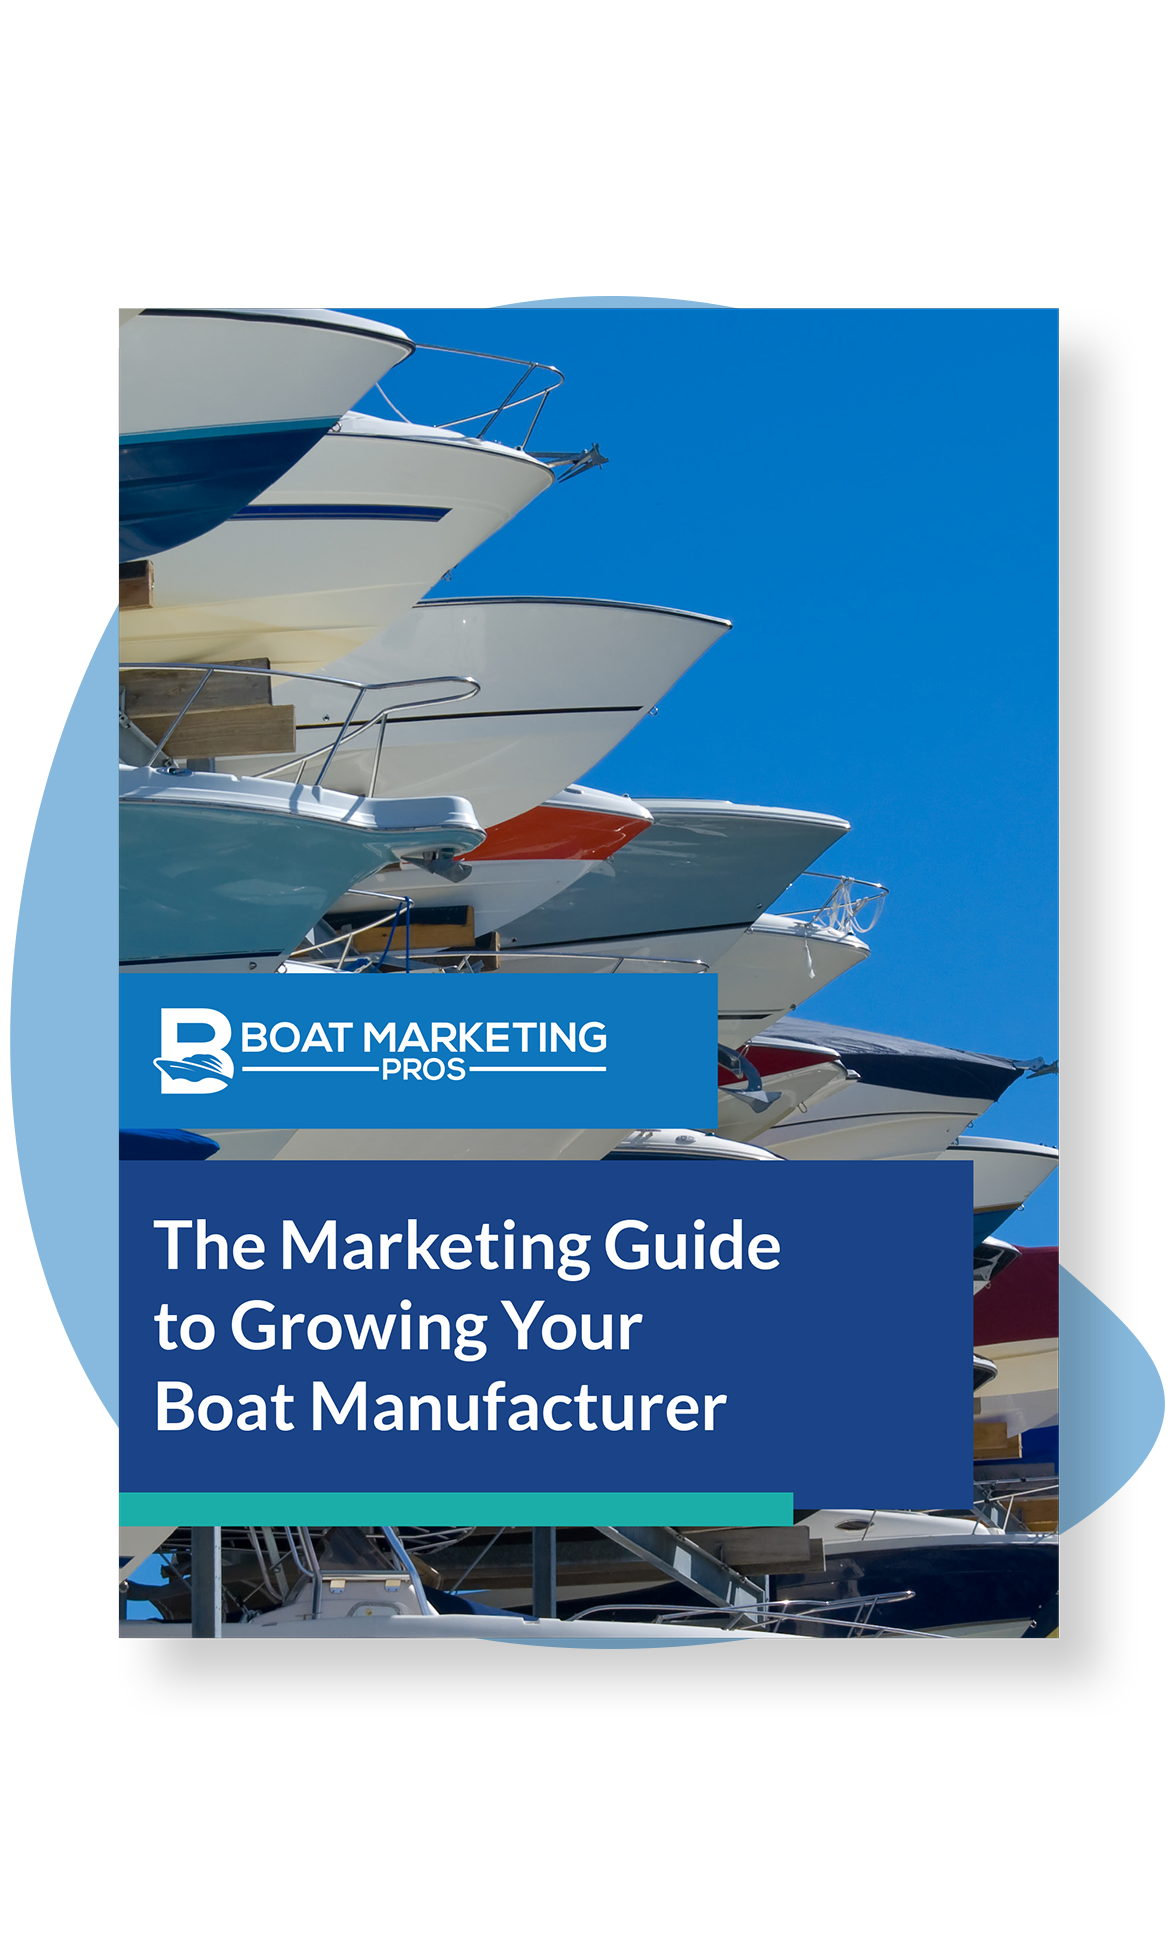 The Marketing Guide to Growing Your Boat Manufacturer